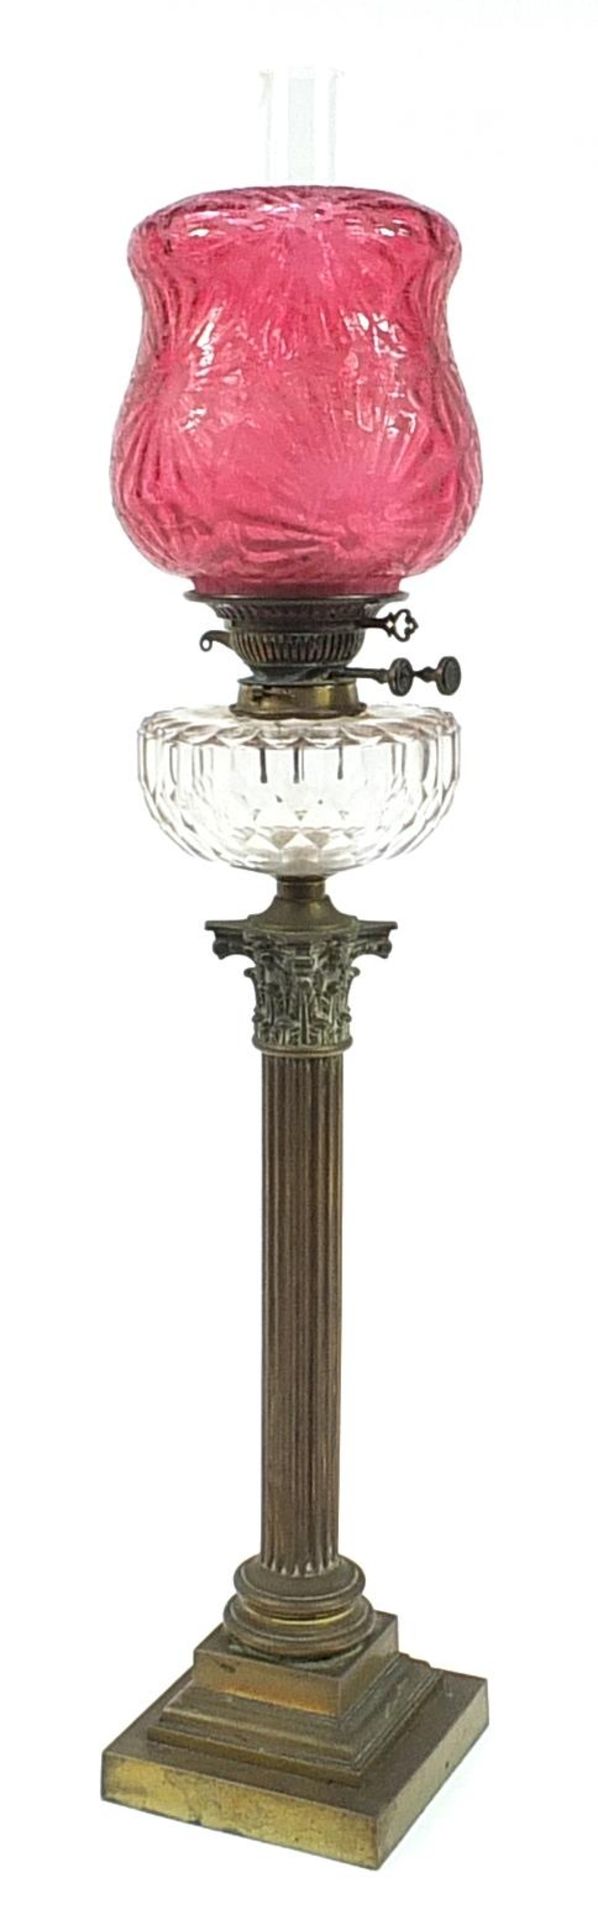 Victorian brass Corinthian column oil lamp with cranberry glass shade and clear glass reservoir, - Image 2 of 3